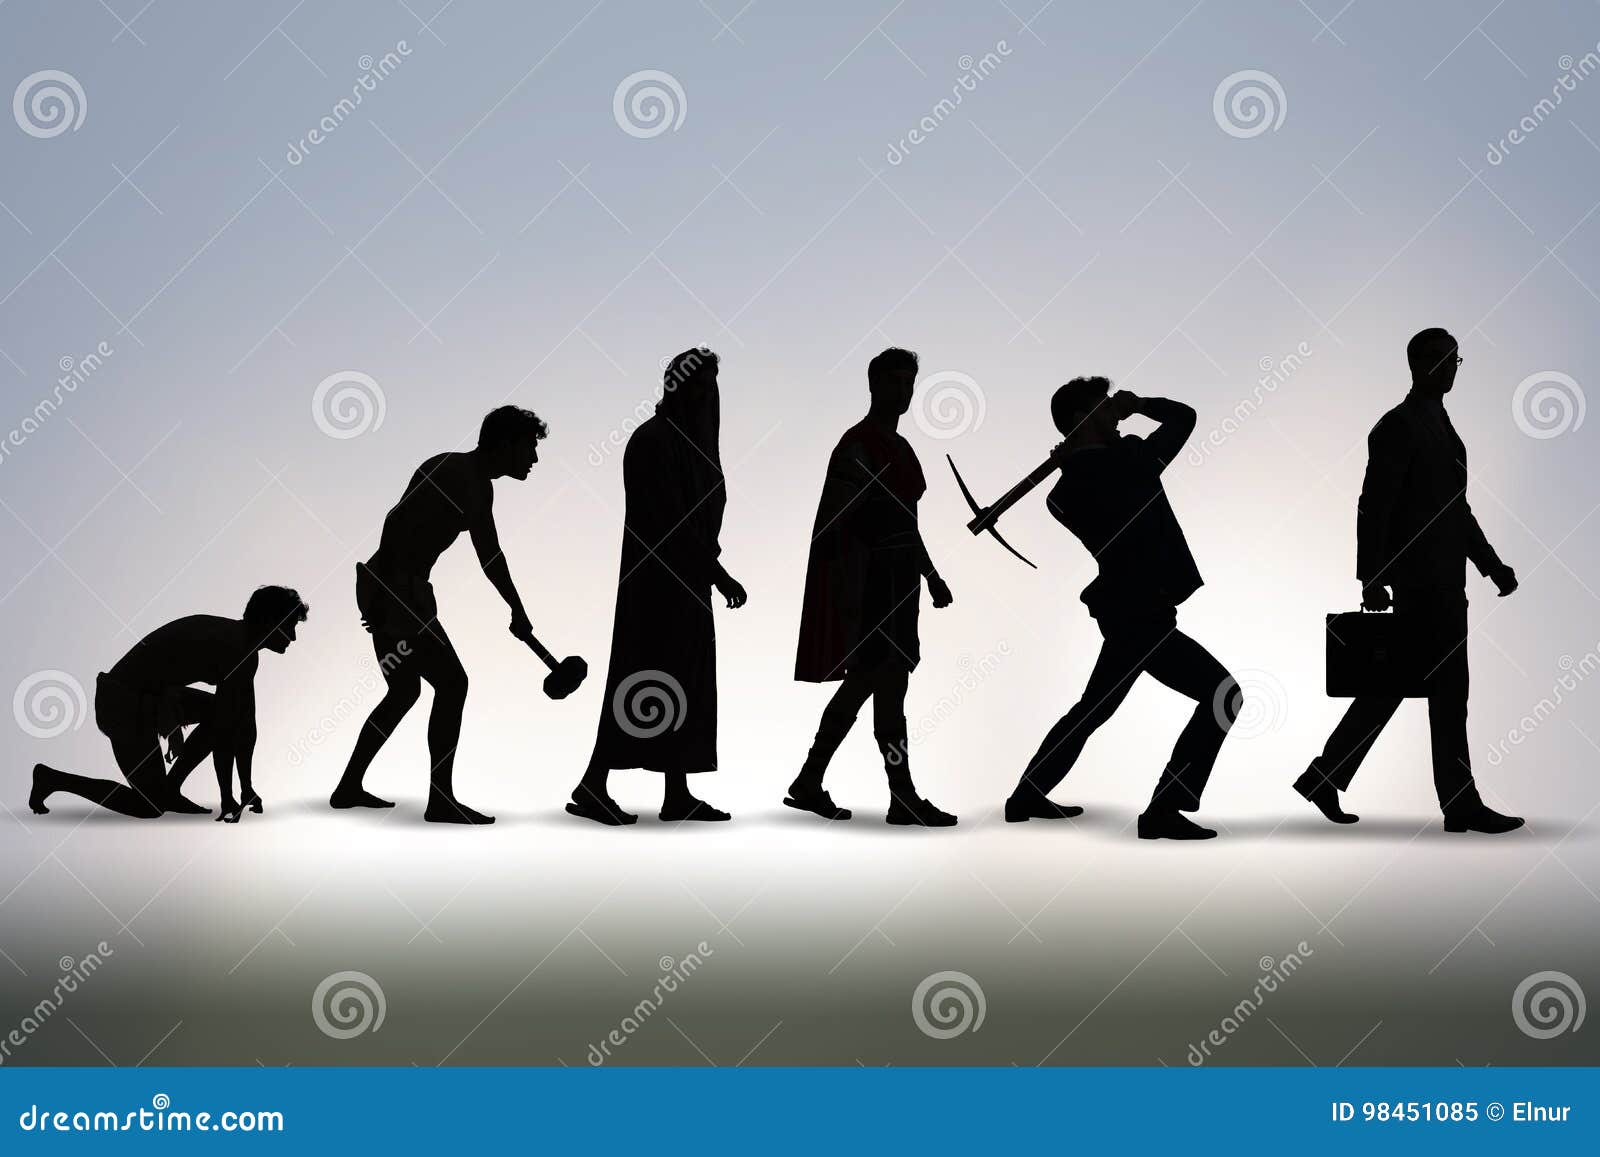 The Progression of Man Mankind from Ancient To Modern Stock Image ...